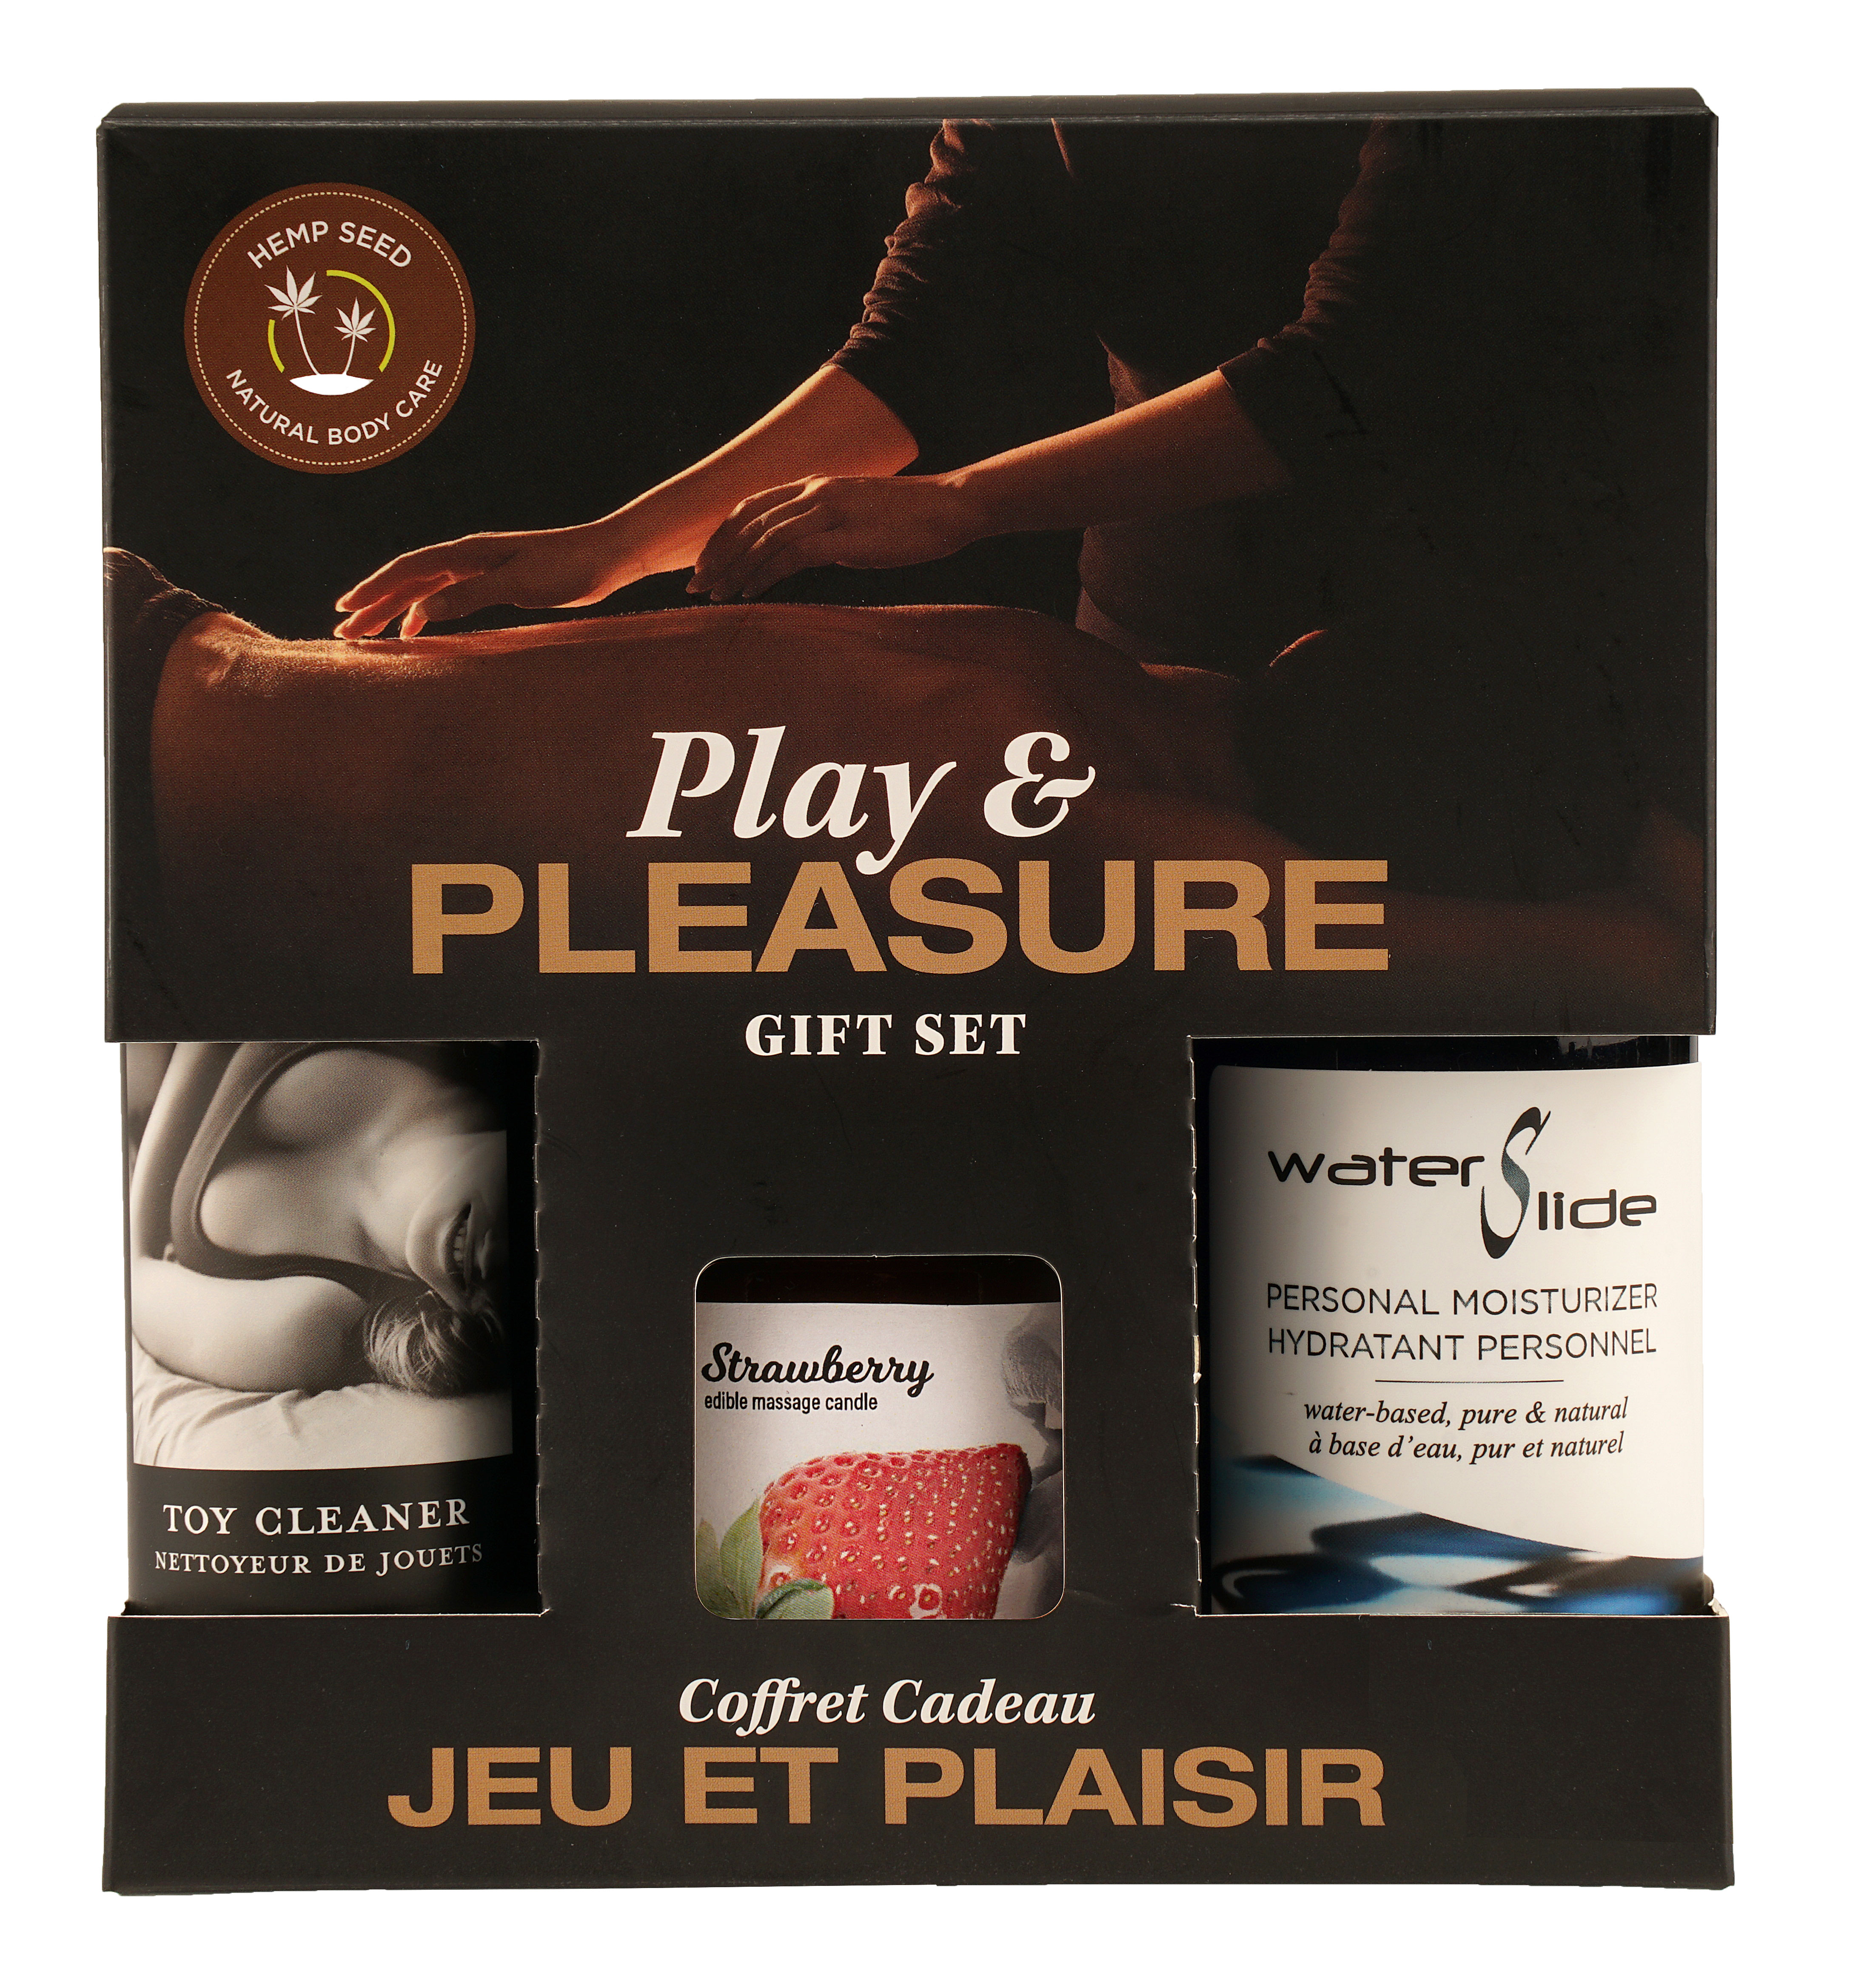 hemp seed by night play and pleasure gift set strawberry 